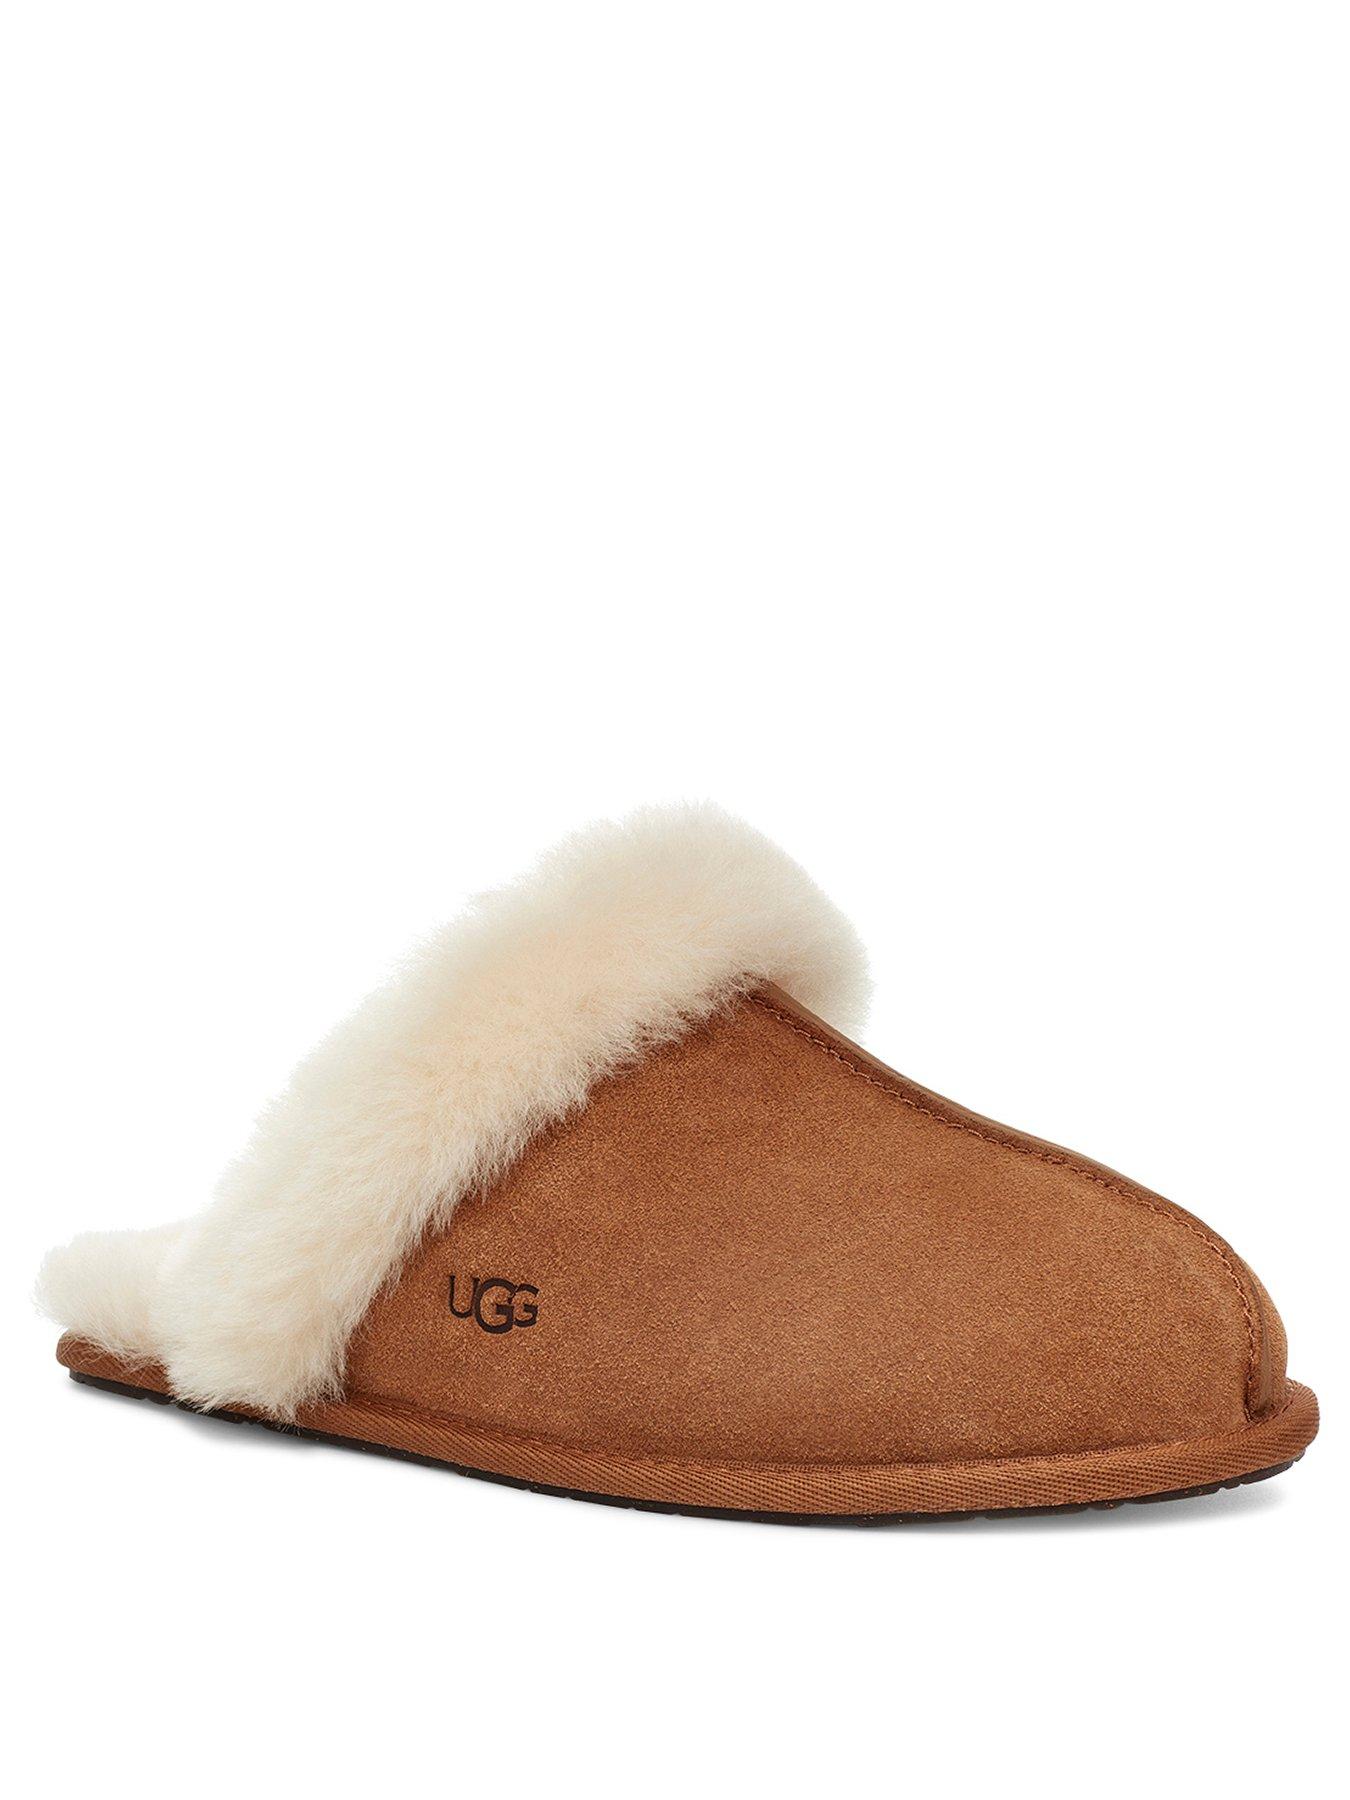 ugg scuffette slippers size 8